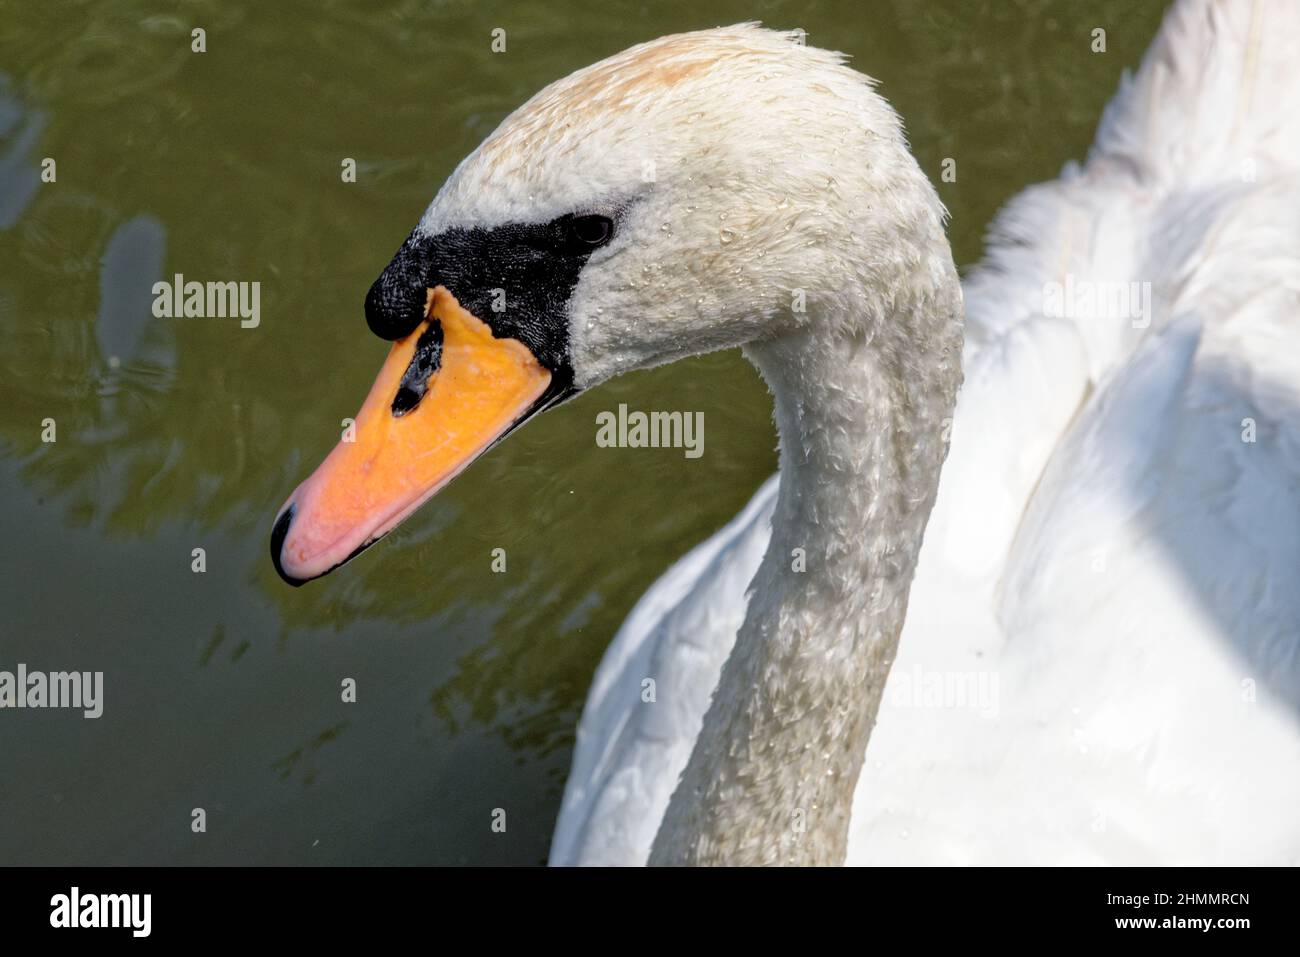 Swan by the River Kennet in Reading - Berkshire - United Kingdom Stock Photo